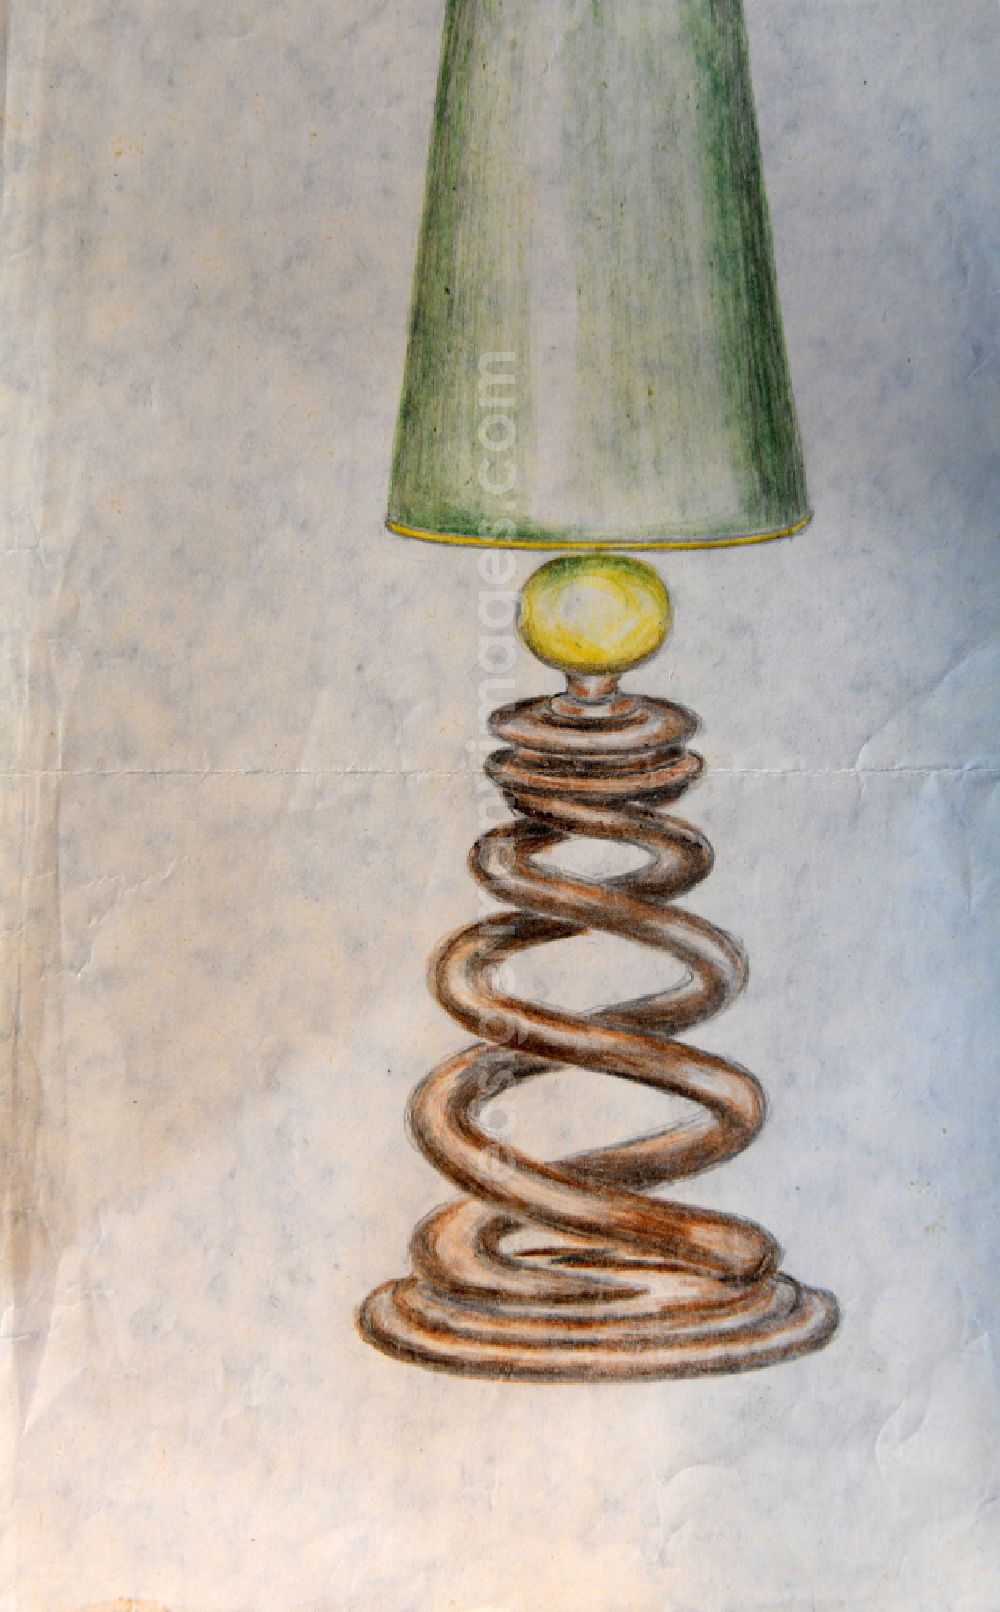 GDR image archive: Halberstadt - VG Image free work: Colored pencil drawing Lamp by the artist Siegfried Gebser in Halberstadt in the state of Saxony-Anhalt in the area of the former GDR, German Democratic Republic